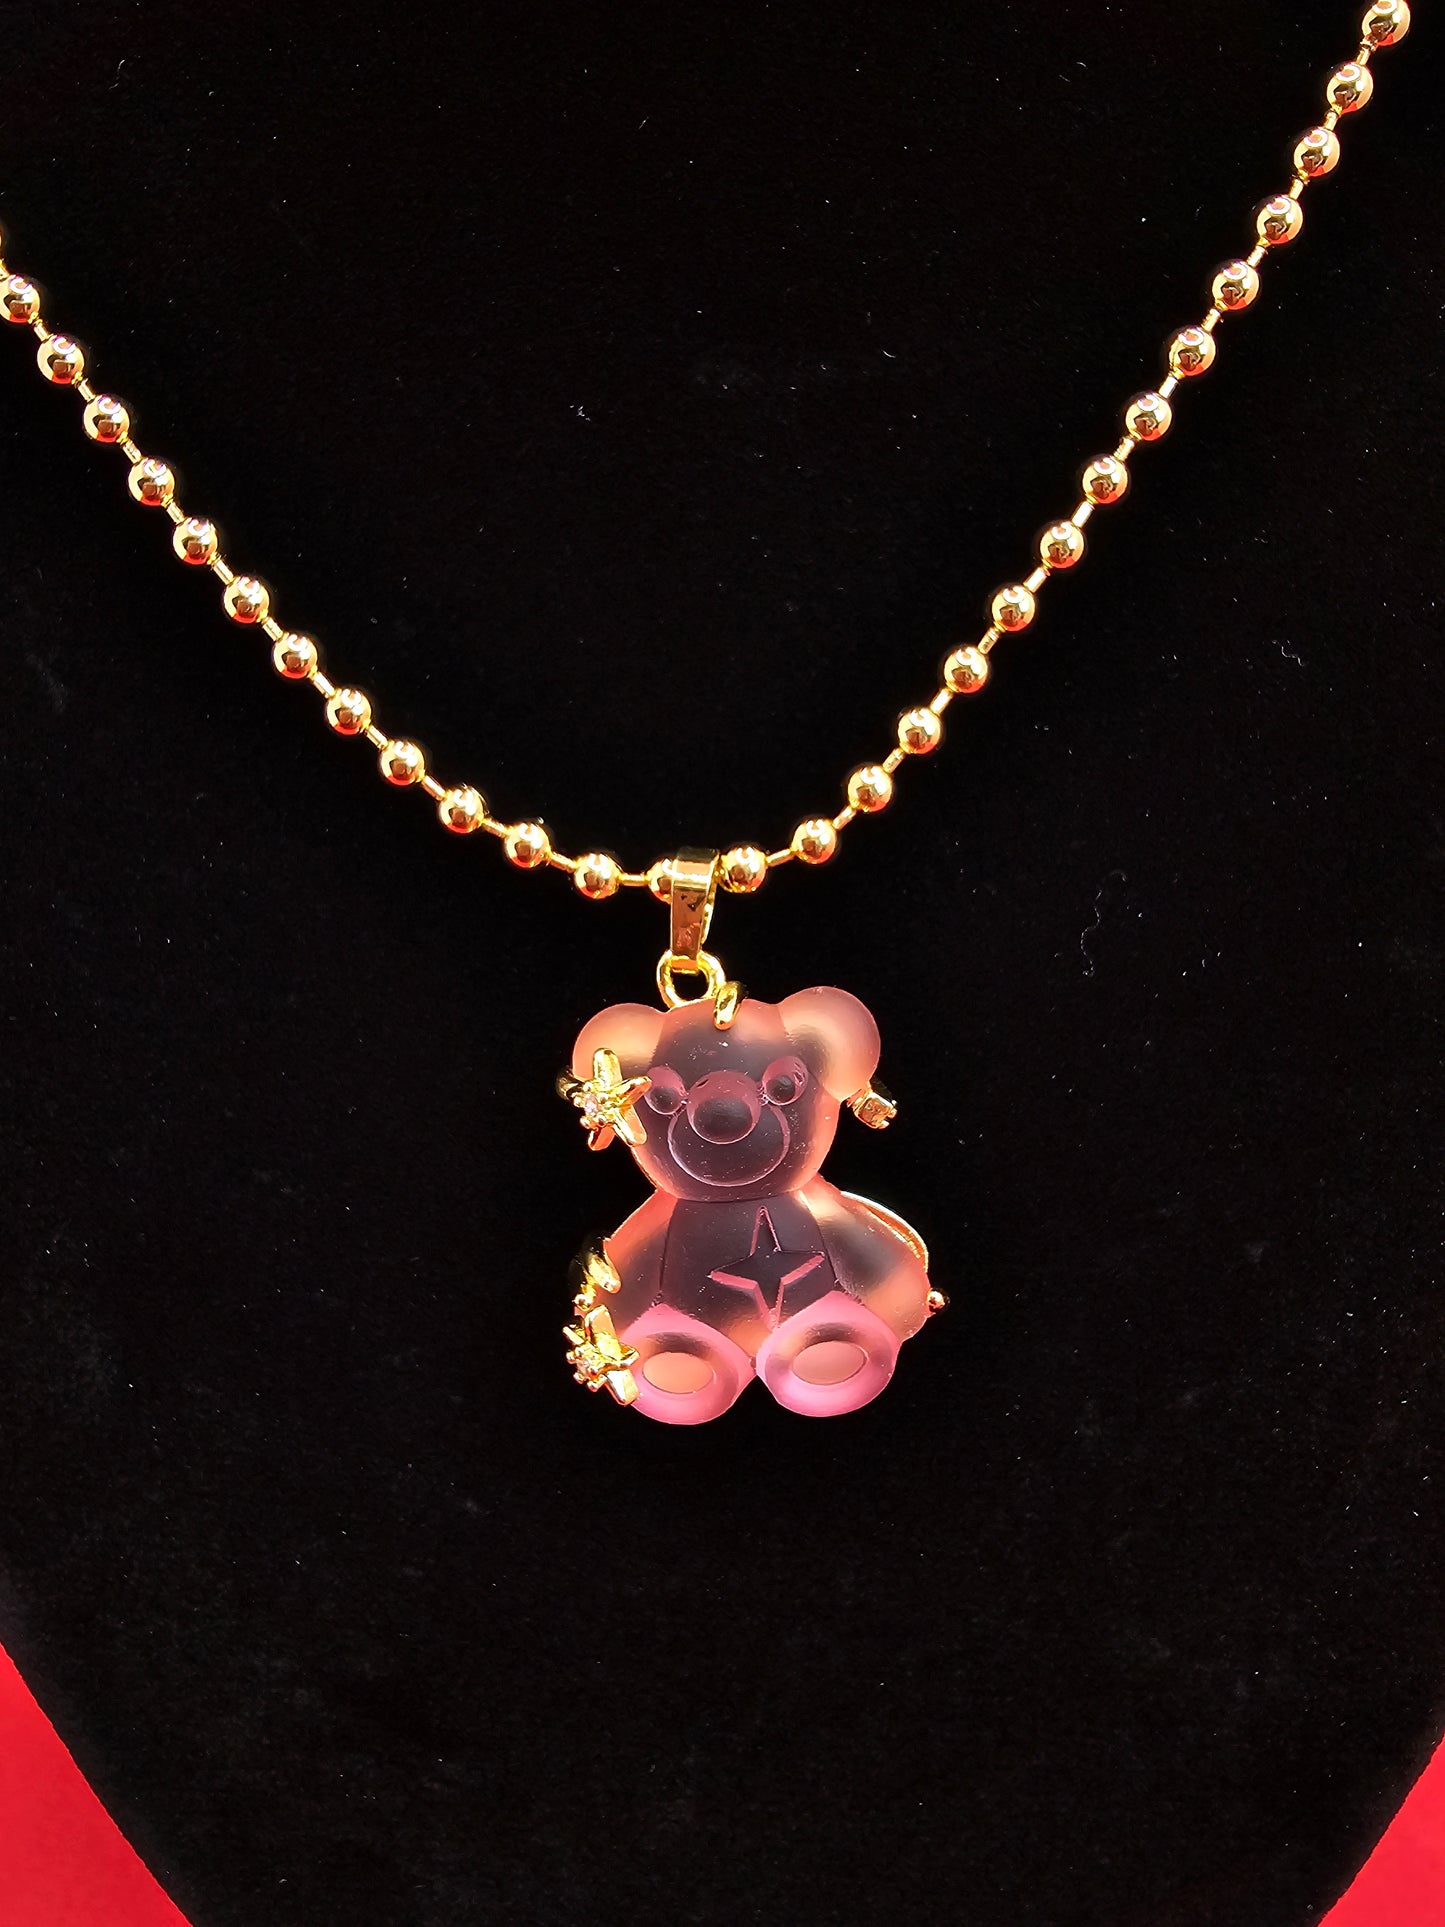 Teddy Bear Necklace - Dripping N Diamonds  | Necklace,